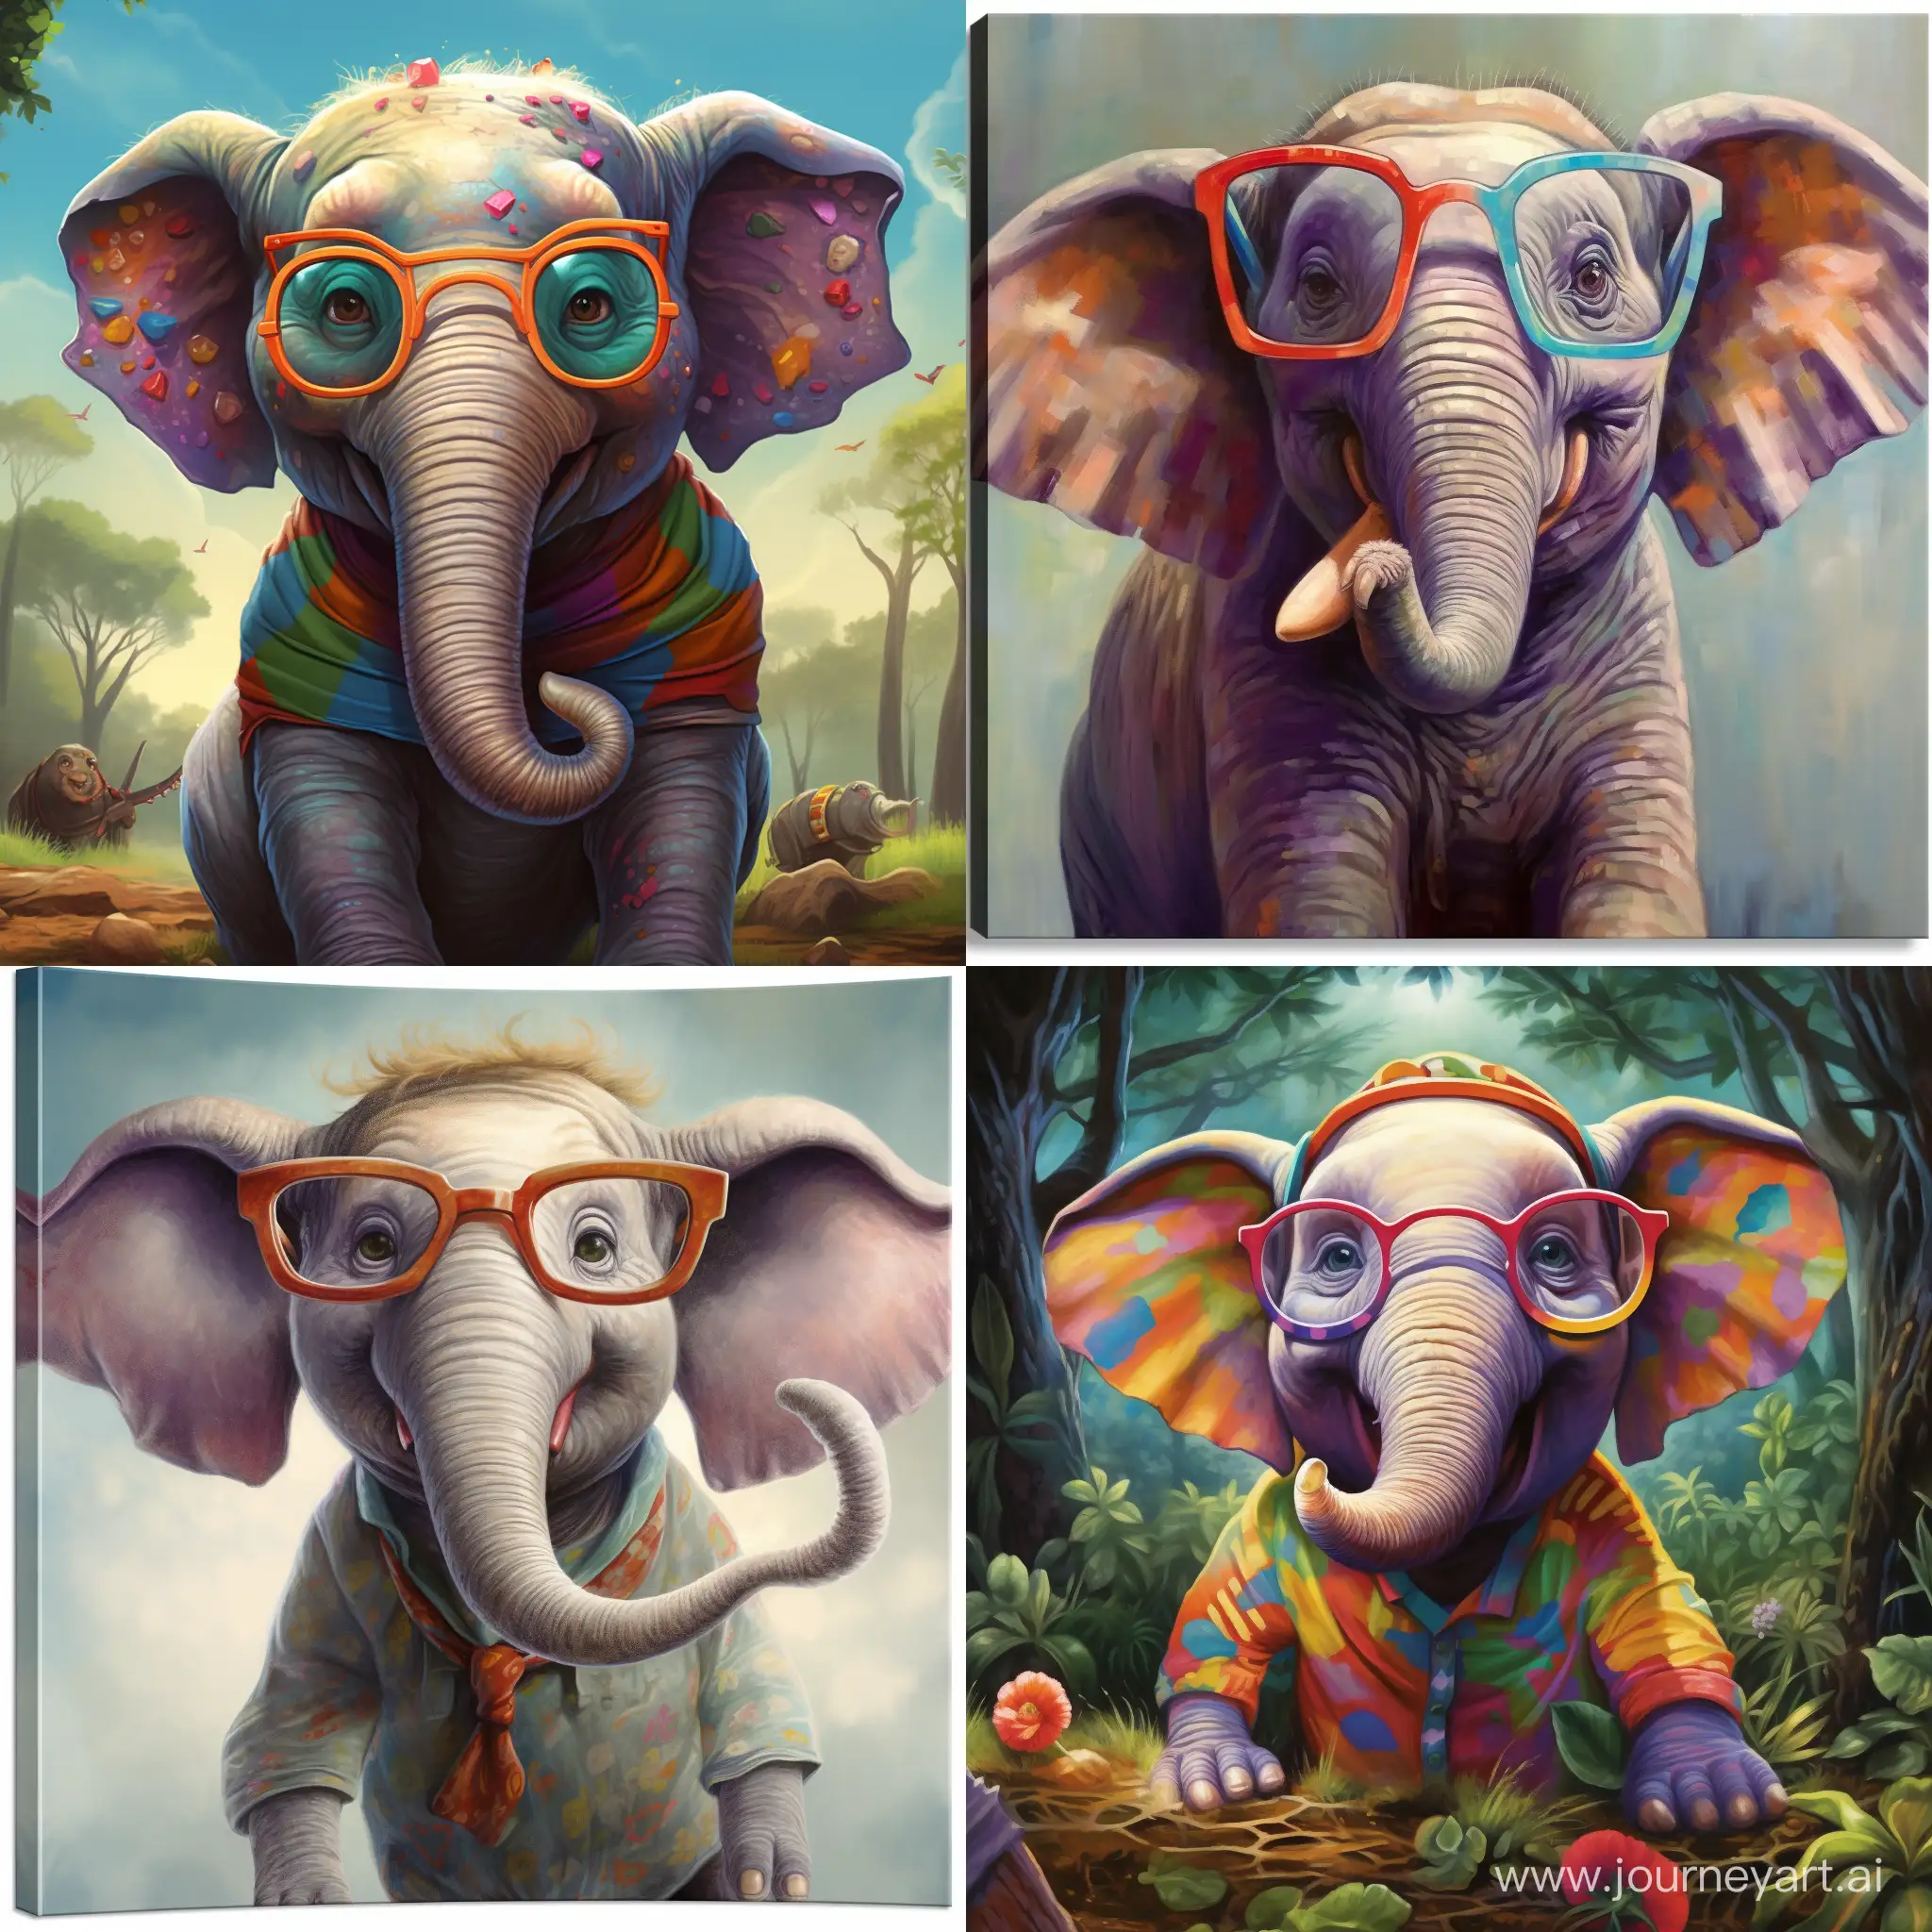 A happy elephant wears huge glasses. The glasses have fun prints and bright colors. The elephant shows enthusiasm as he explains to his friends how these giant glasses help him see the little things in life